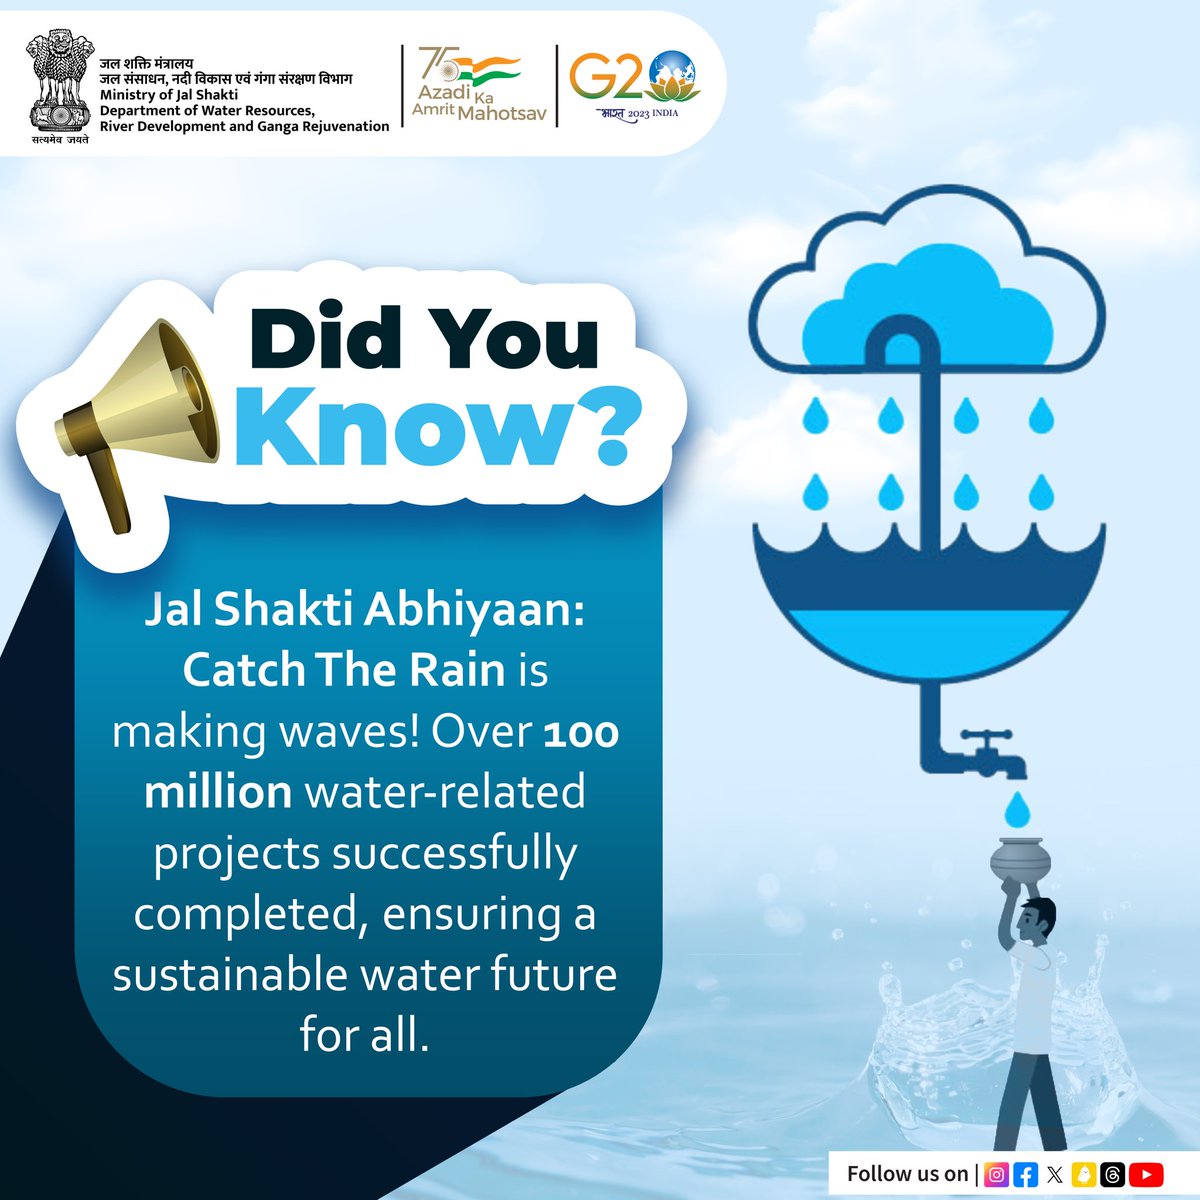 Transforming raindrops into solutions! With Jal Shakti Abhiyan, let's champion water-centric projects that replenish our ecosystems and quench our communities' thirst. Together, let's conserve, harvest, and thrive! #JalShaktiAbhiyan #WaterConservation #CatchTheRain